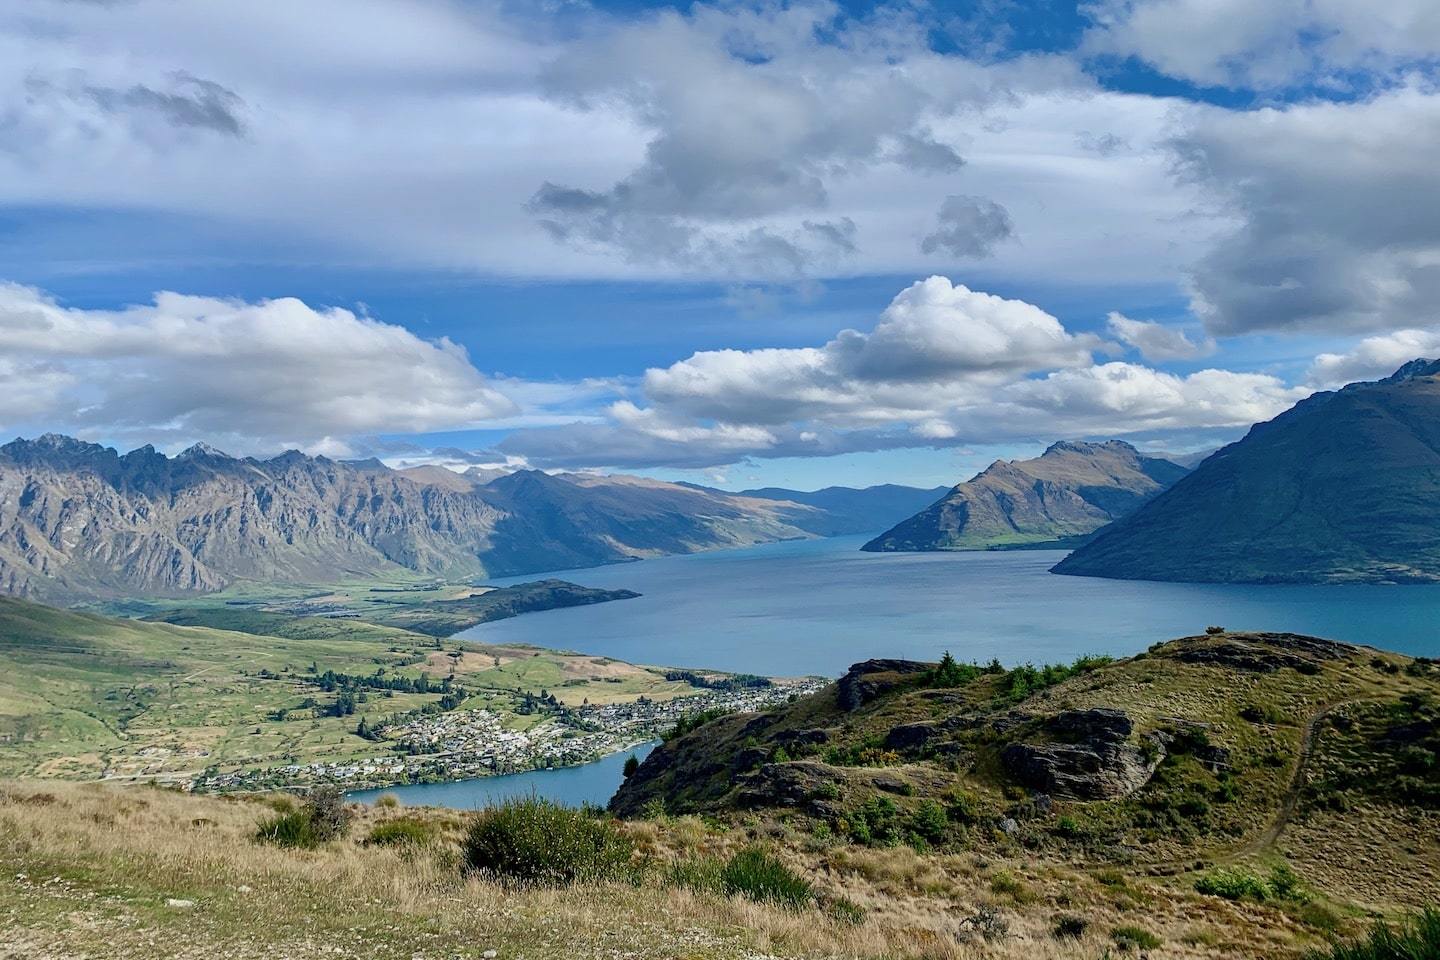 Queenstown Hill, one of the most popular hikes in Queenstown